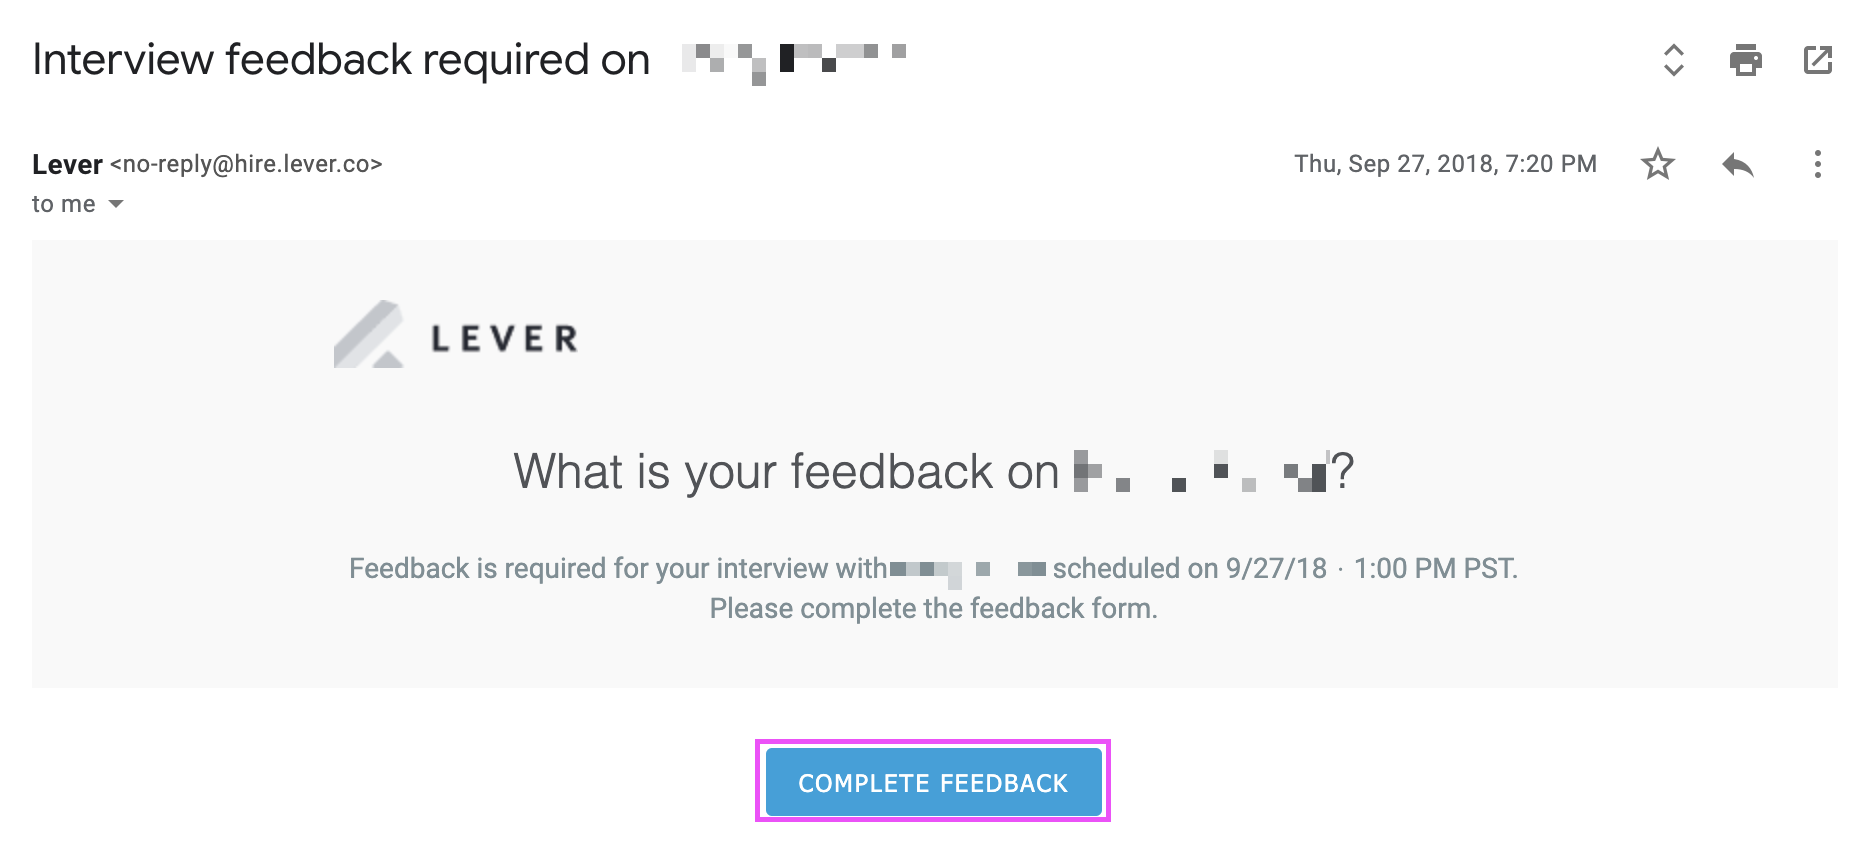 Complete feedback button outlined on interview reminder email.